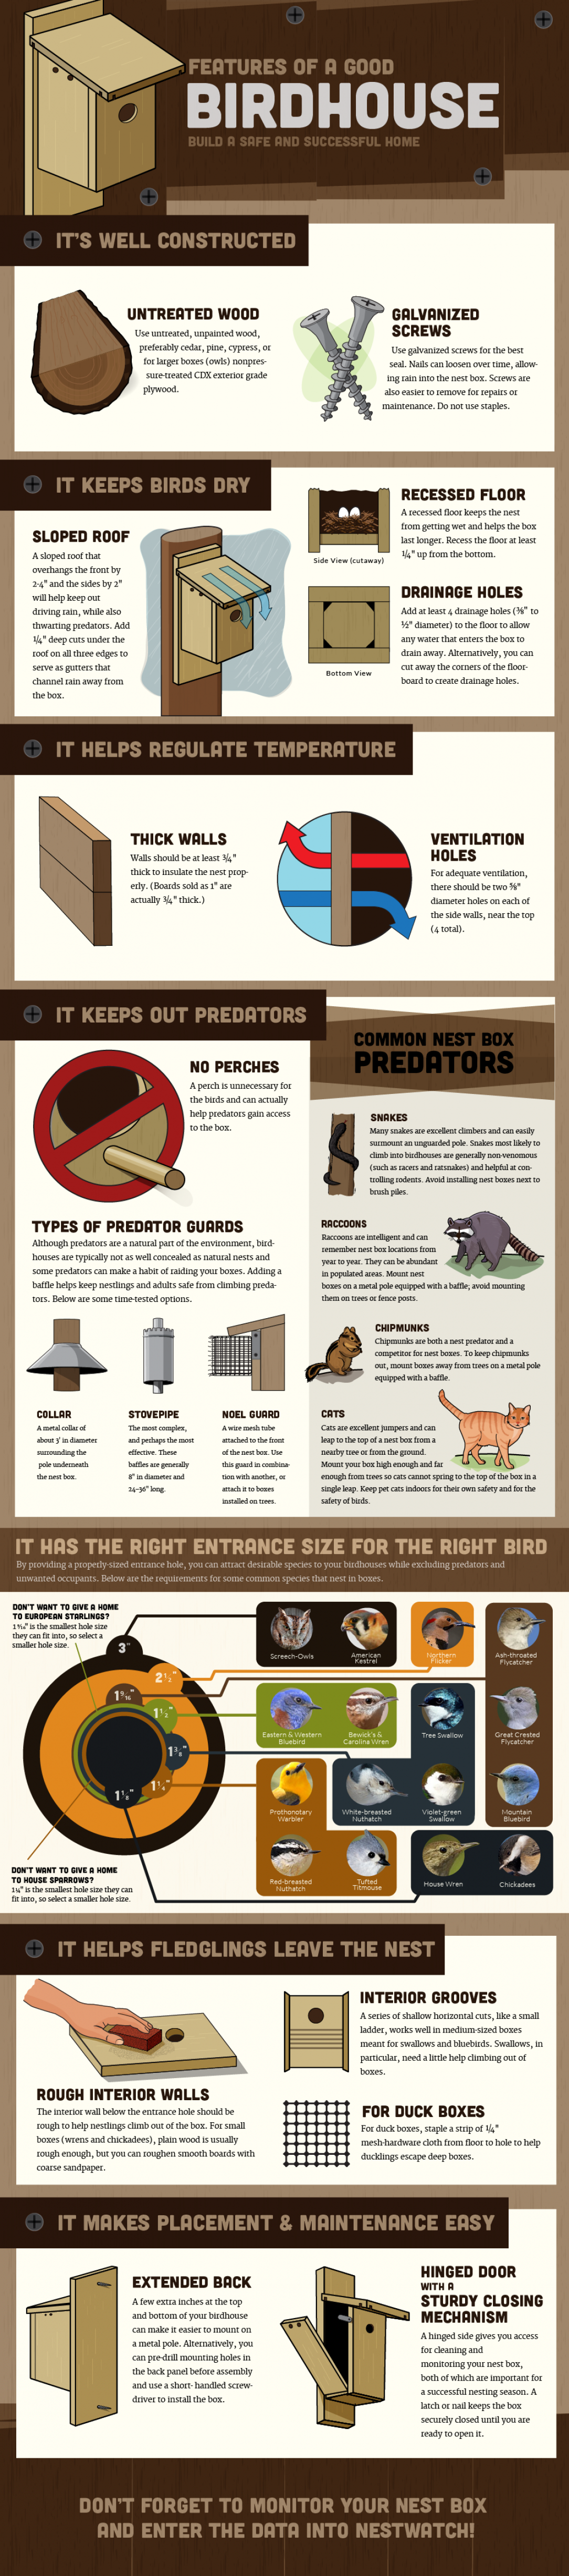 Features of a good birdhouse